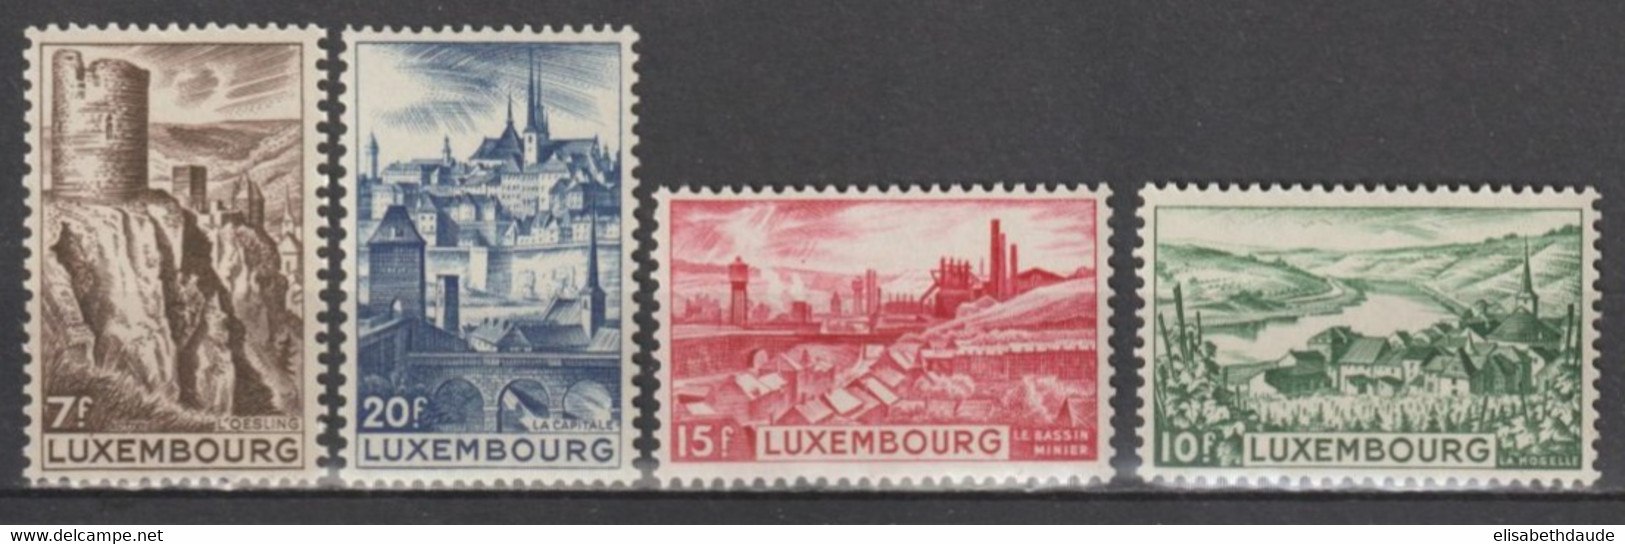 LUXEMBOURG - 1948 - SERIE COMPLETE YVERT N°406/409 ** MNH - COTE = 35 EUR. - Ungebraucht